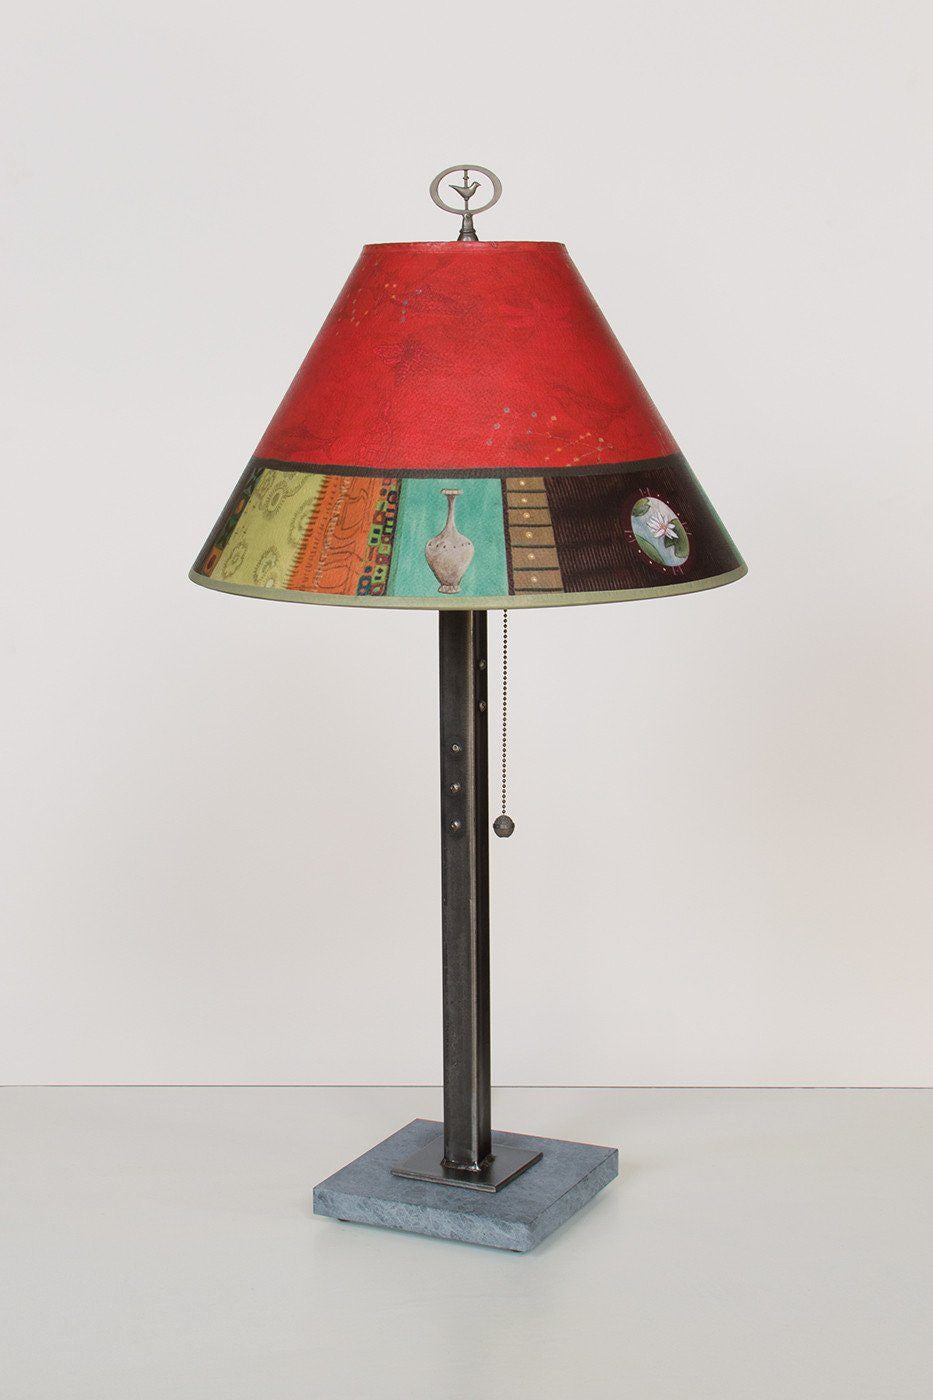 Steel Table Lamp on Marble with Medium Conical Shade in Red Match Lit